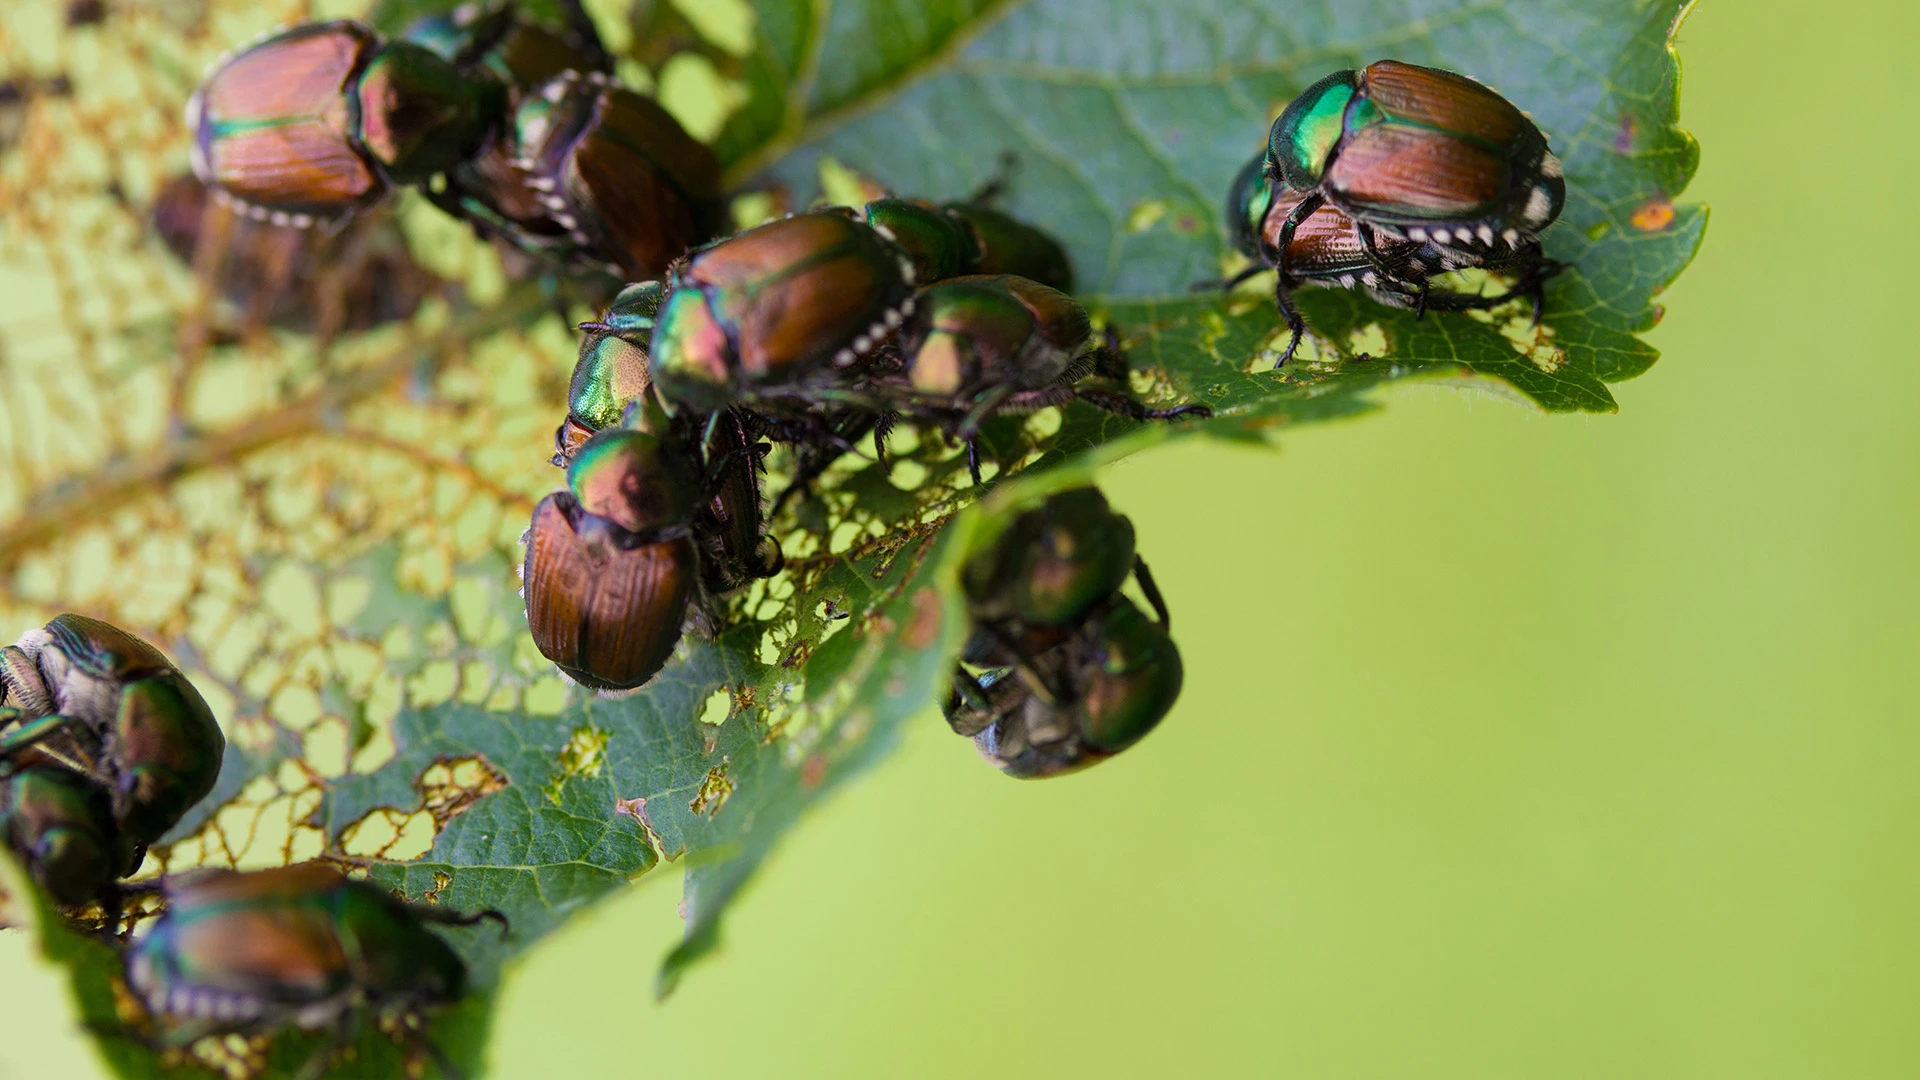 A group of Japanese beetles found on some plants near a home in Fishers, IN.